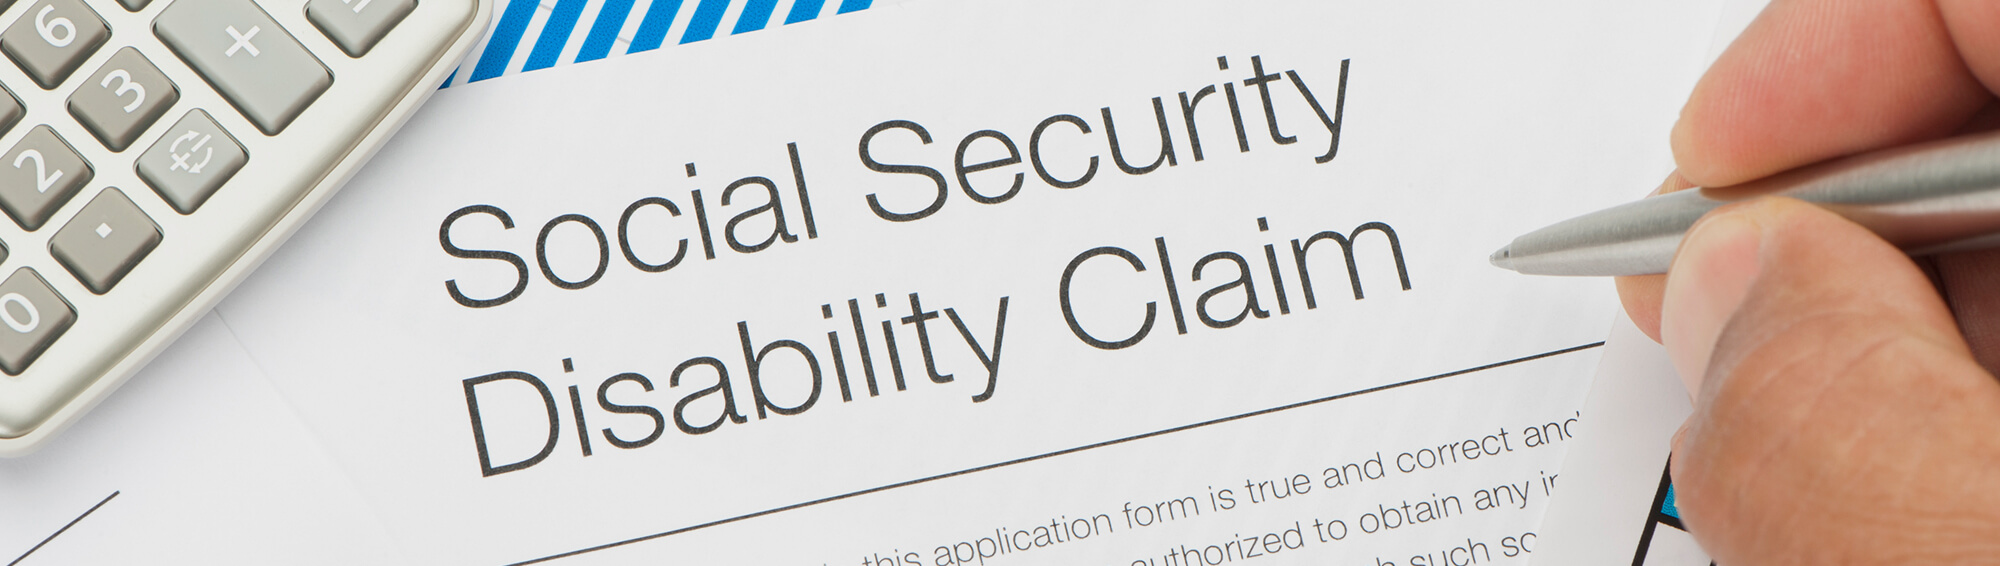 Social Security Disability Appeal Process